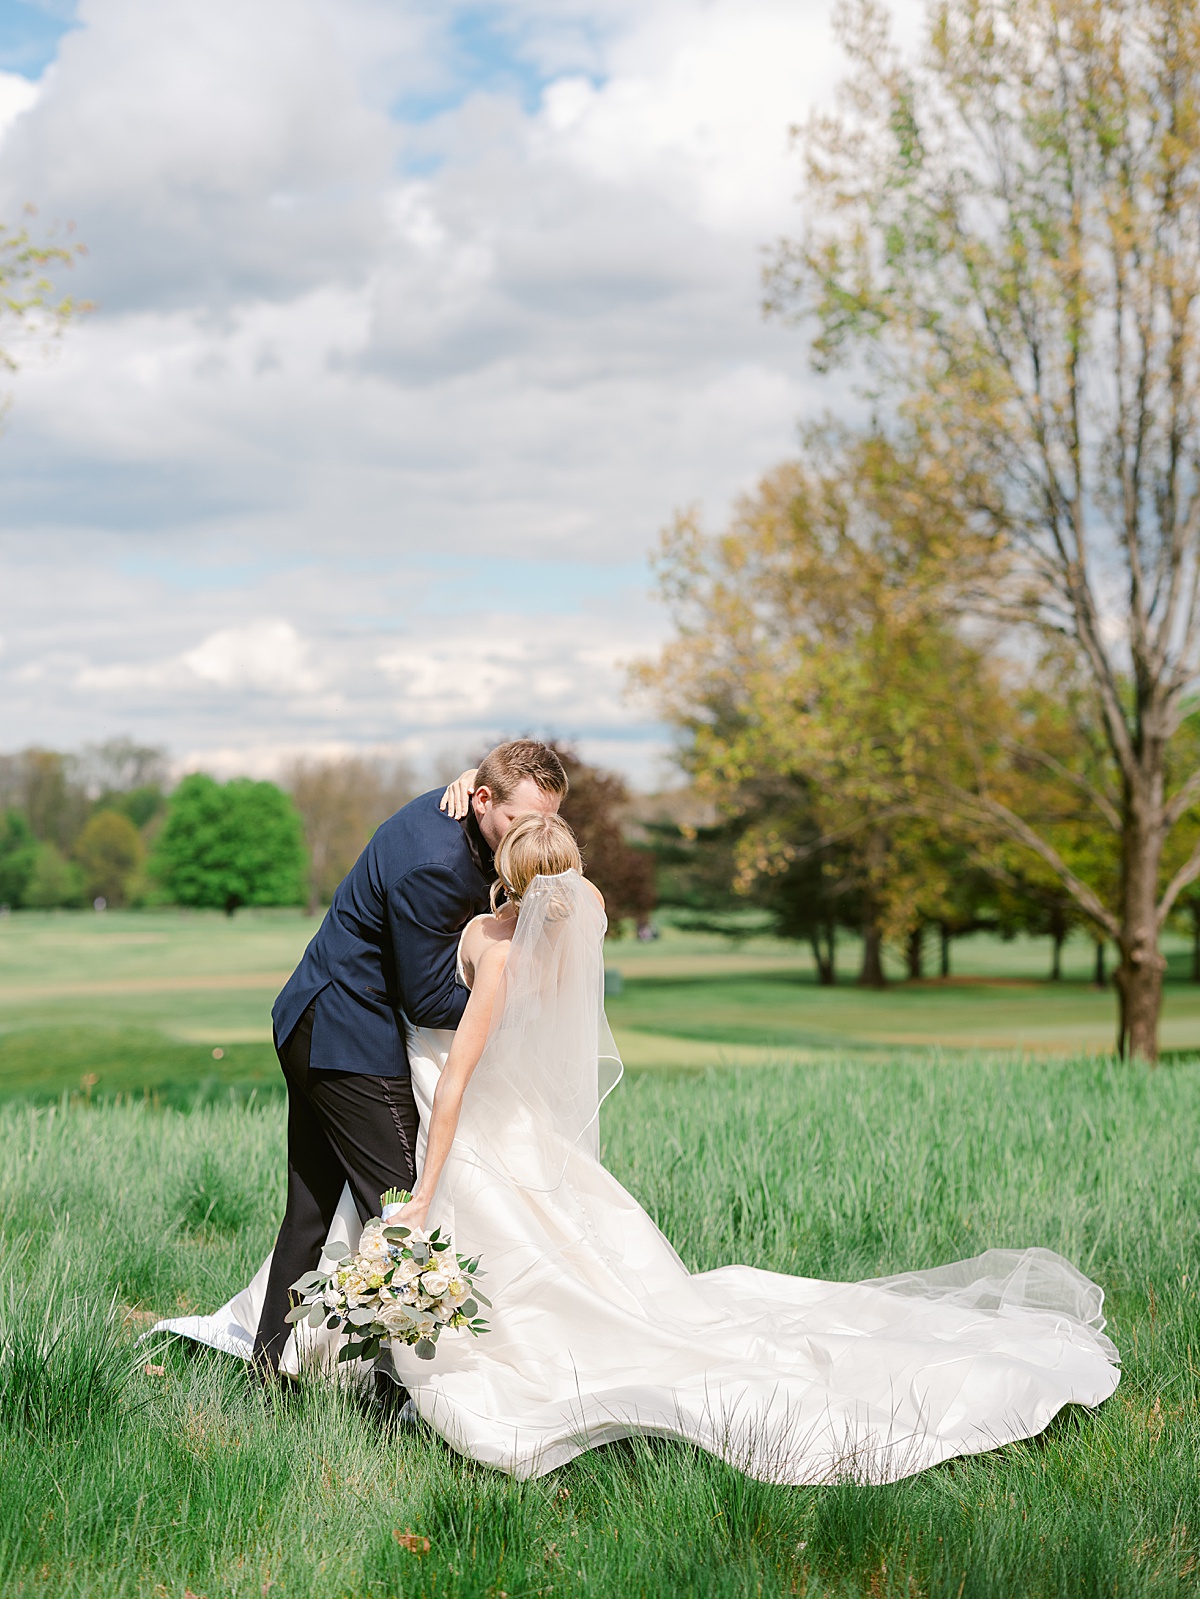 Fiddler's Elbow country club golf course picture with bride and groom spring wedding